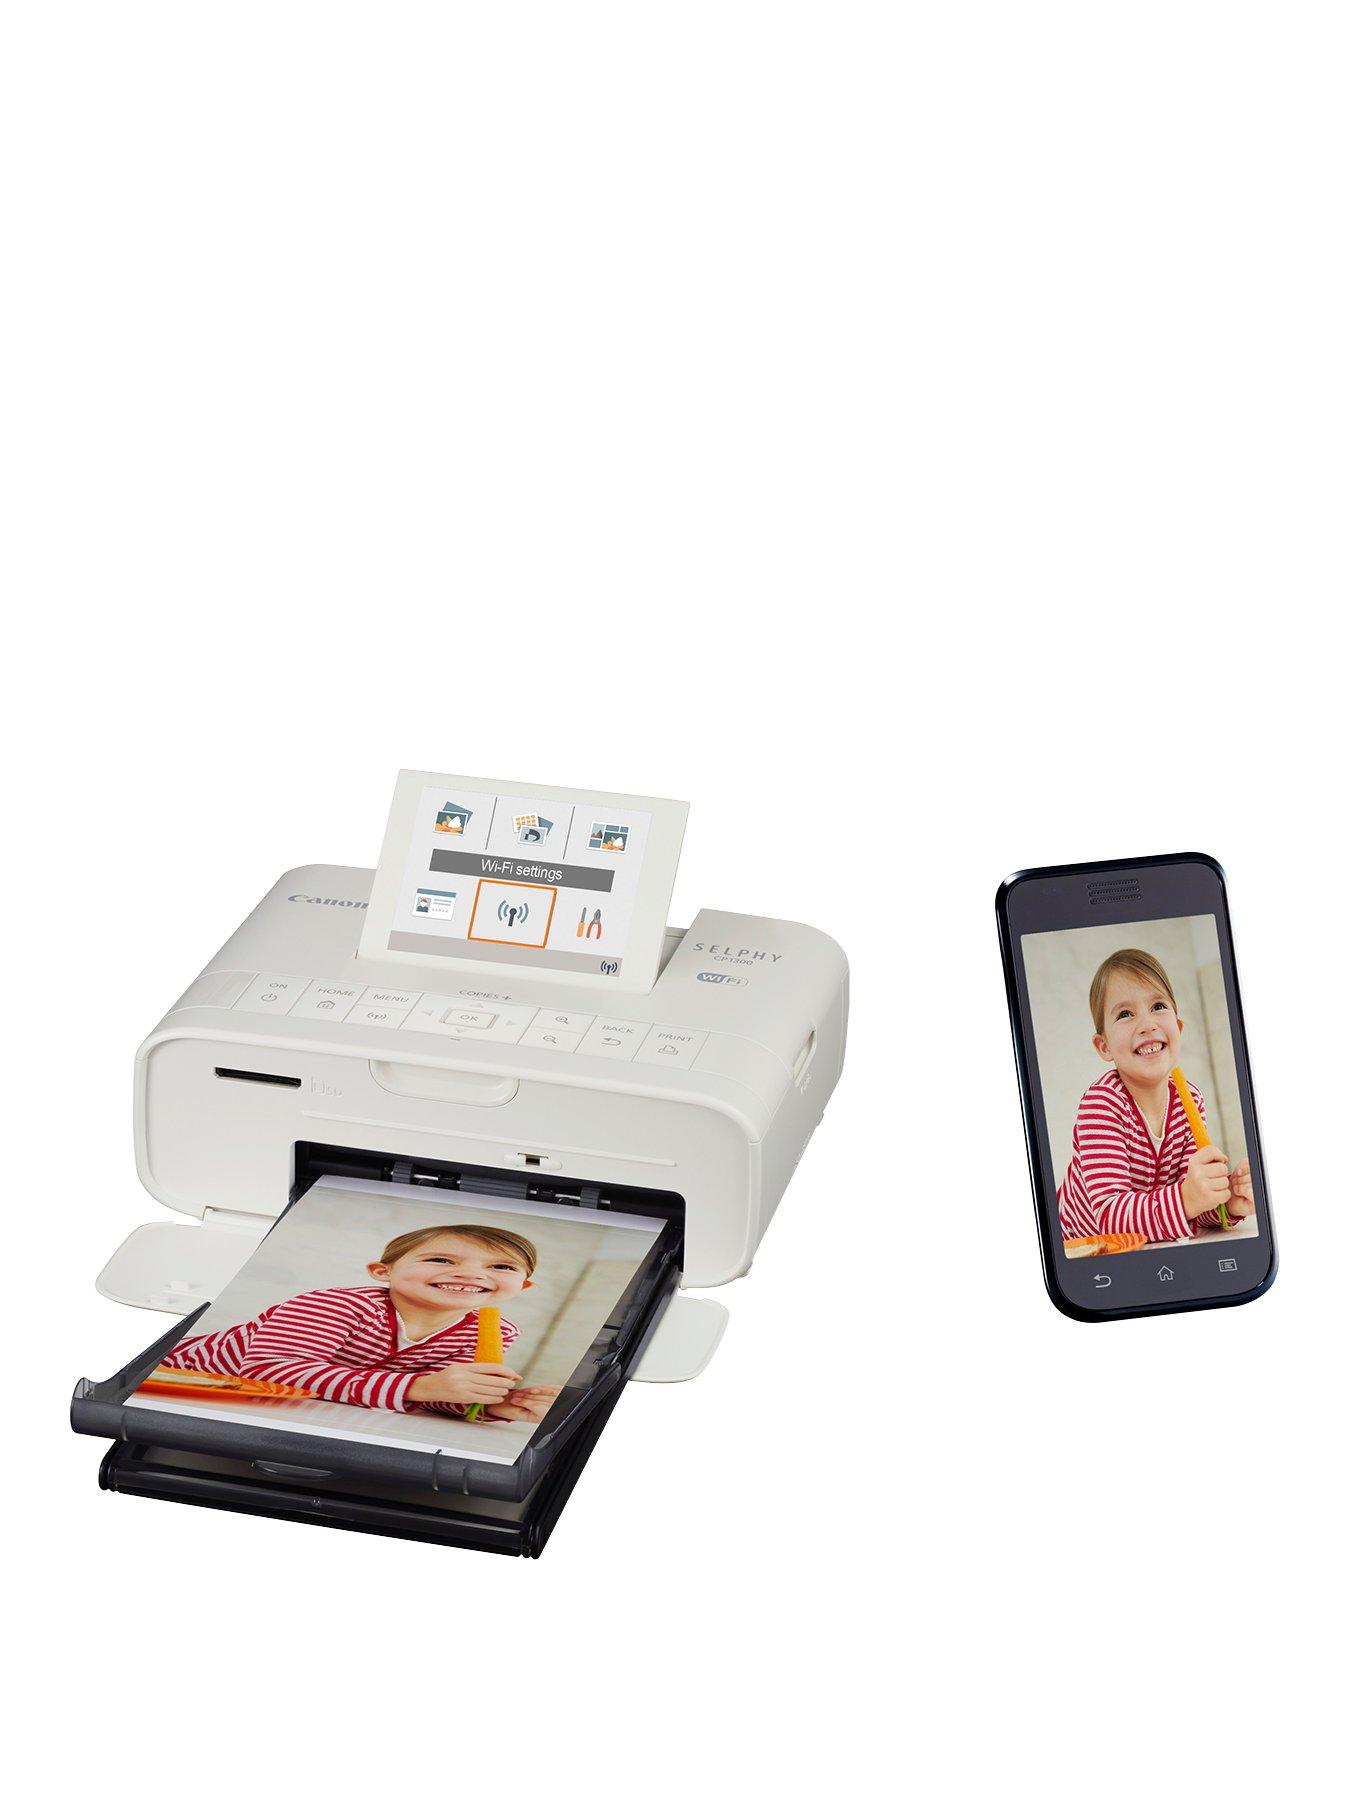 SELPHY CP1300 Compact WiFi Photo Printer White with ink and 108x paper